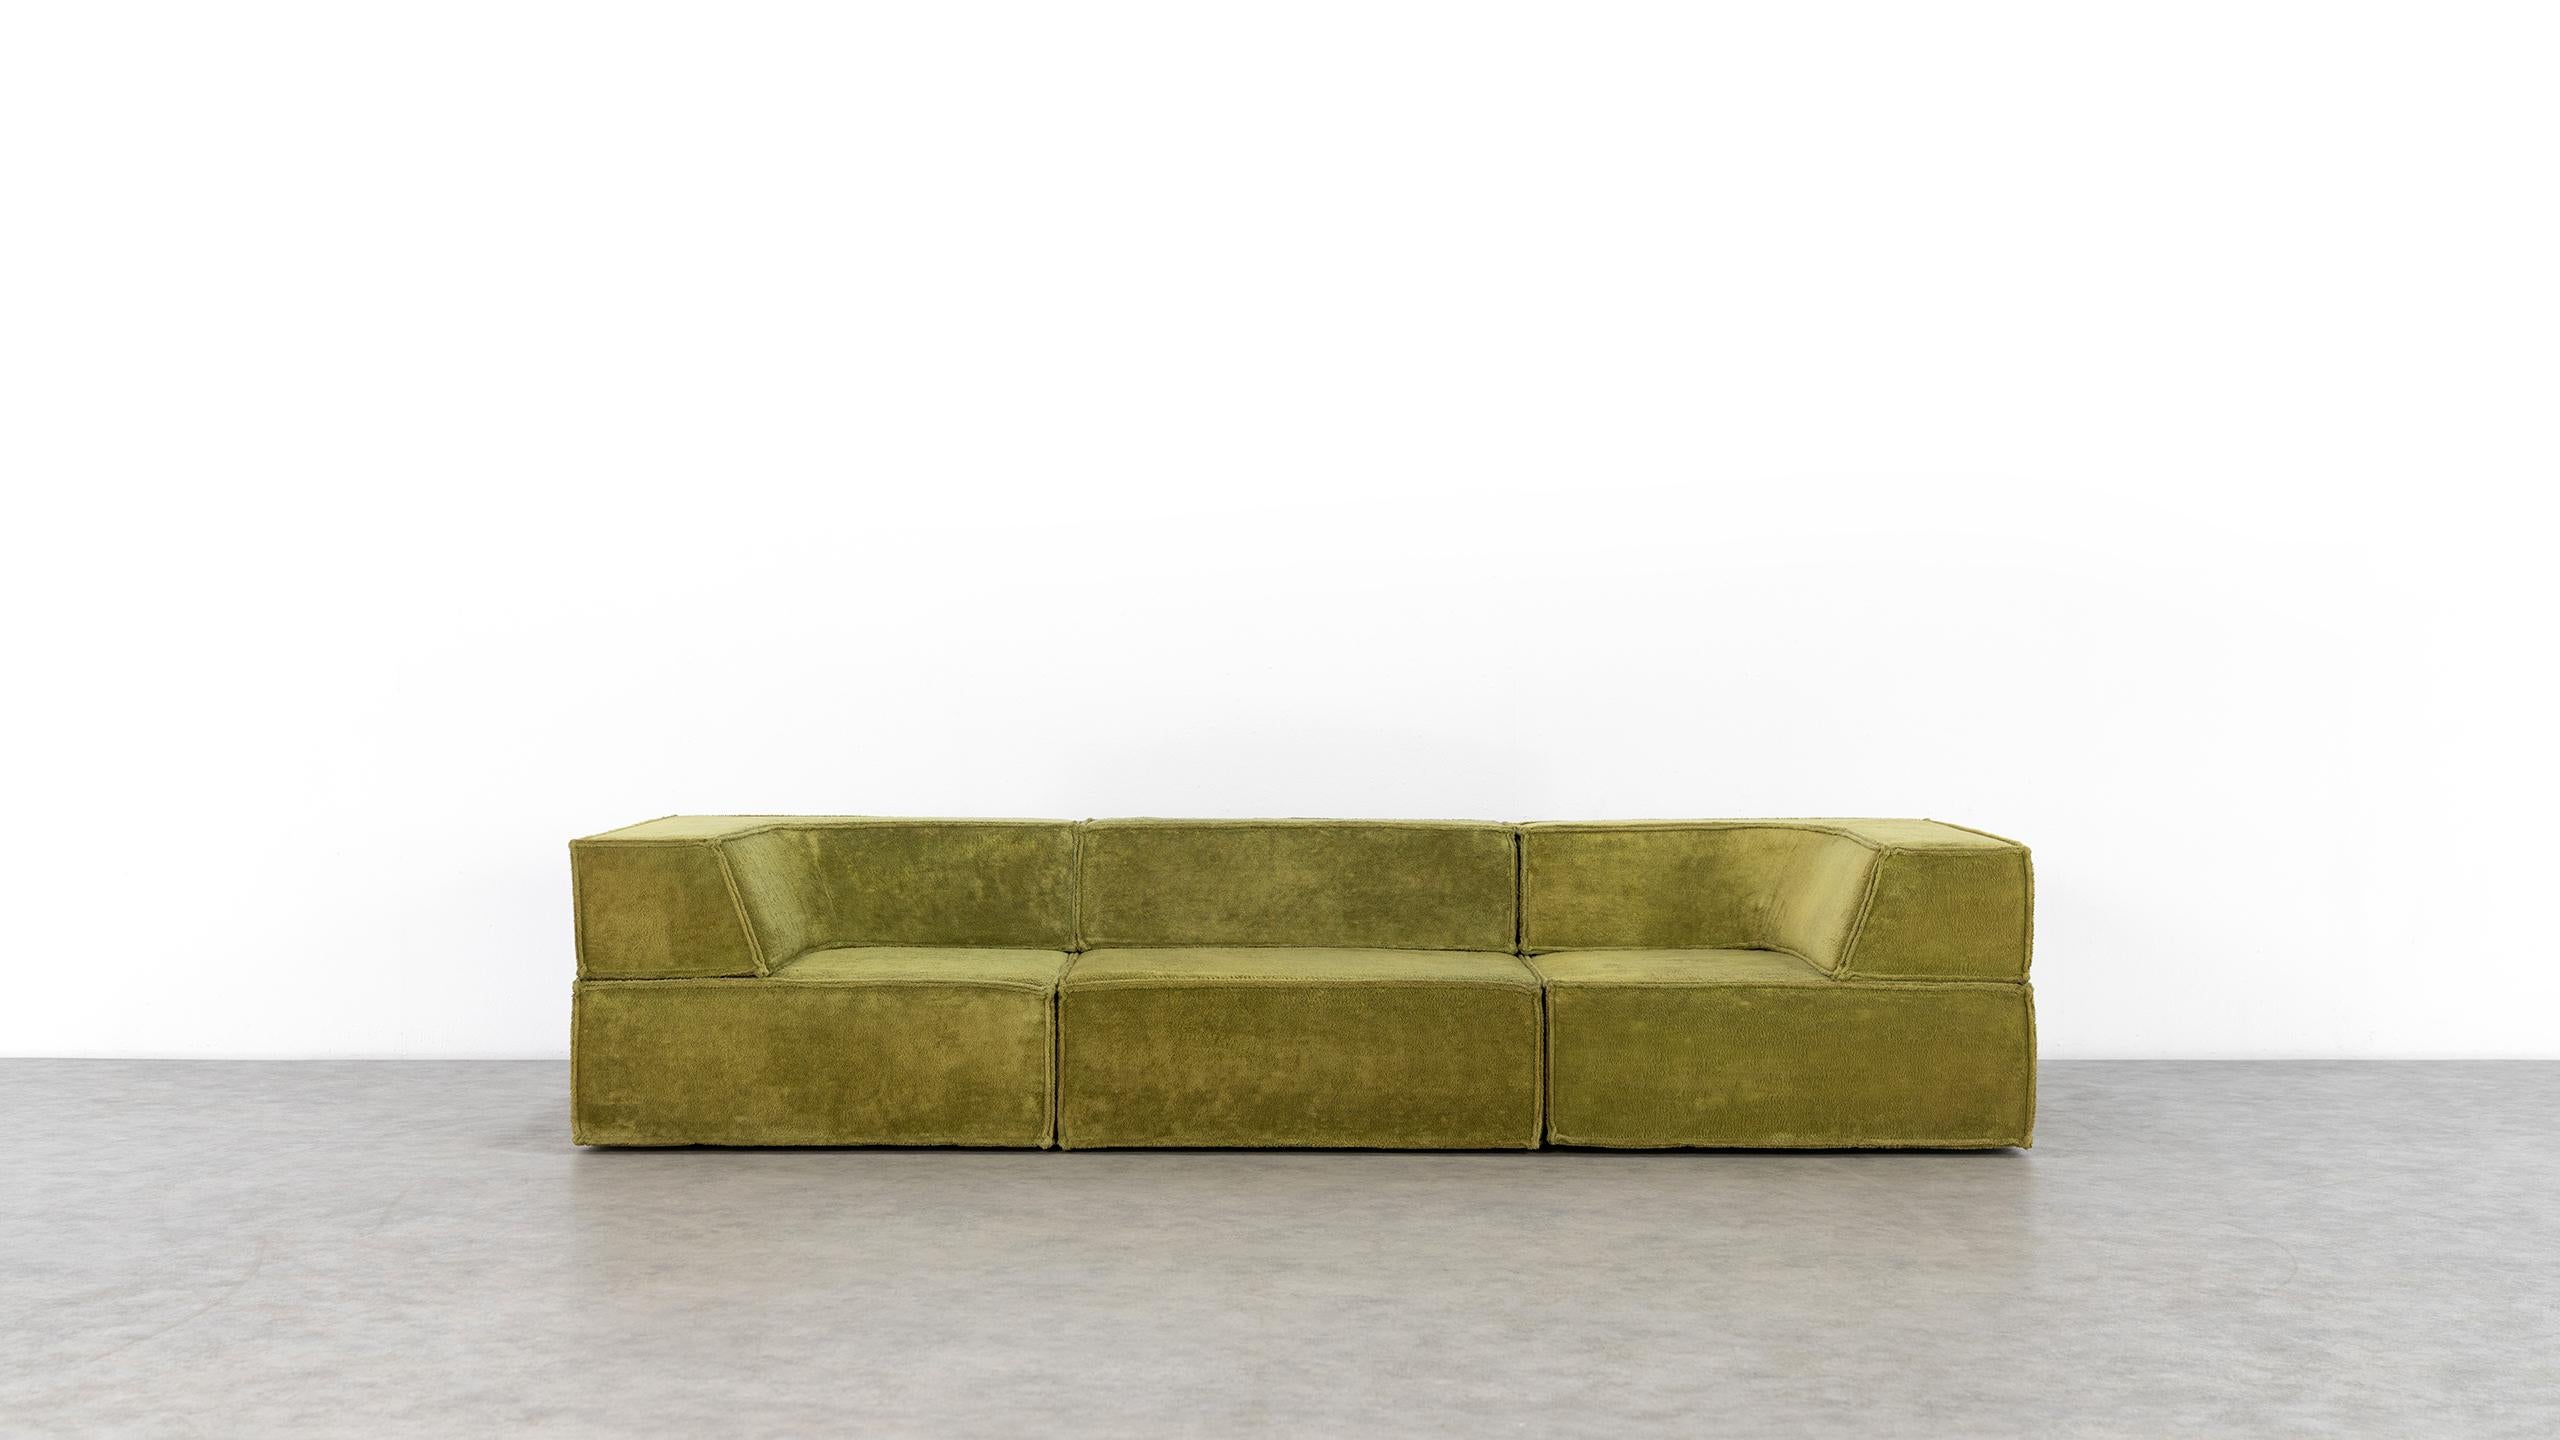 COR trio modular sofa in its original green color teddy-fabric,
designed 1972 by Franz Hero and Karl Odermatt Team Form Ag, Switzerland.

The modular sofa system fits seamlessly into any environment. Take away the backrest and it can also be used as